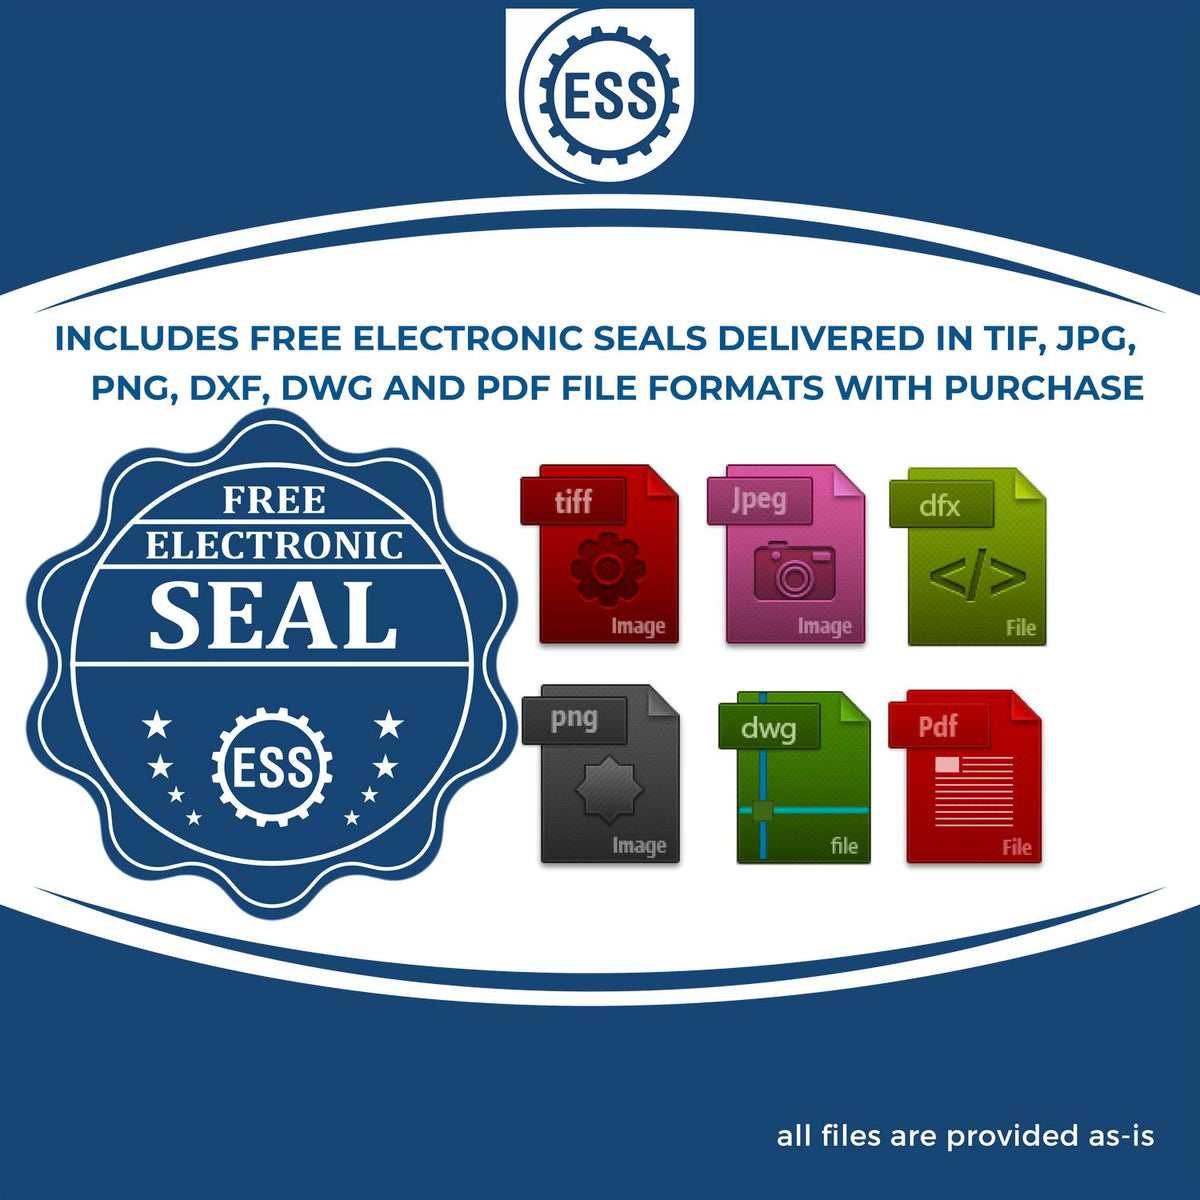 An infographic for the free electronic seal for the Extended Long Reach Alabama Surveyor Embosser illustrating the different file type icons such as DXF, DWG, TIF, JPG and PNG.